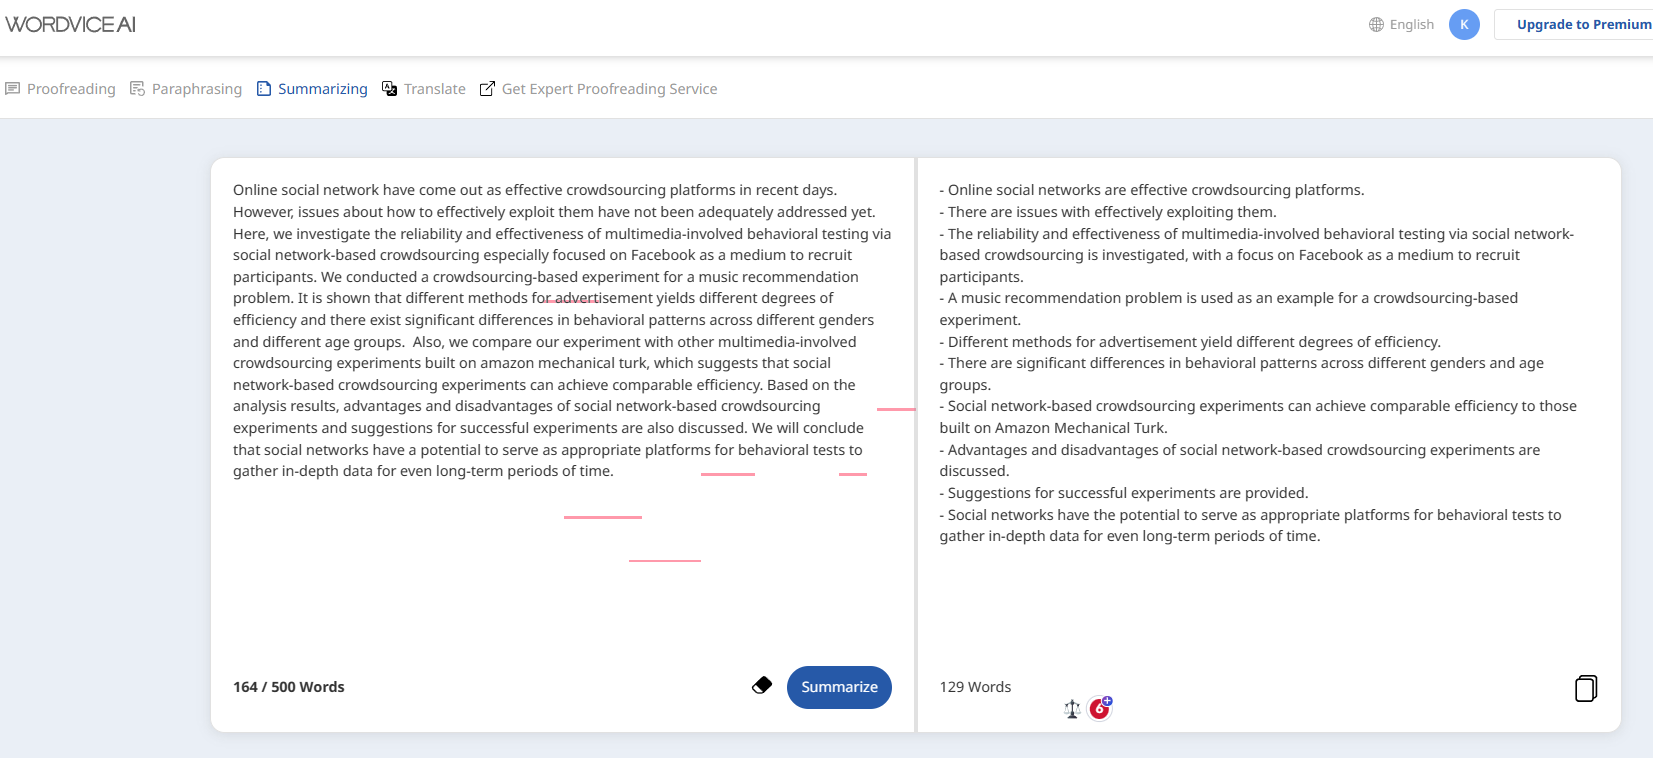 The Wordvice AI Summarizer turns your paragraphs into distinct bullet points to make your main arguments clearer to readers.